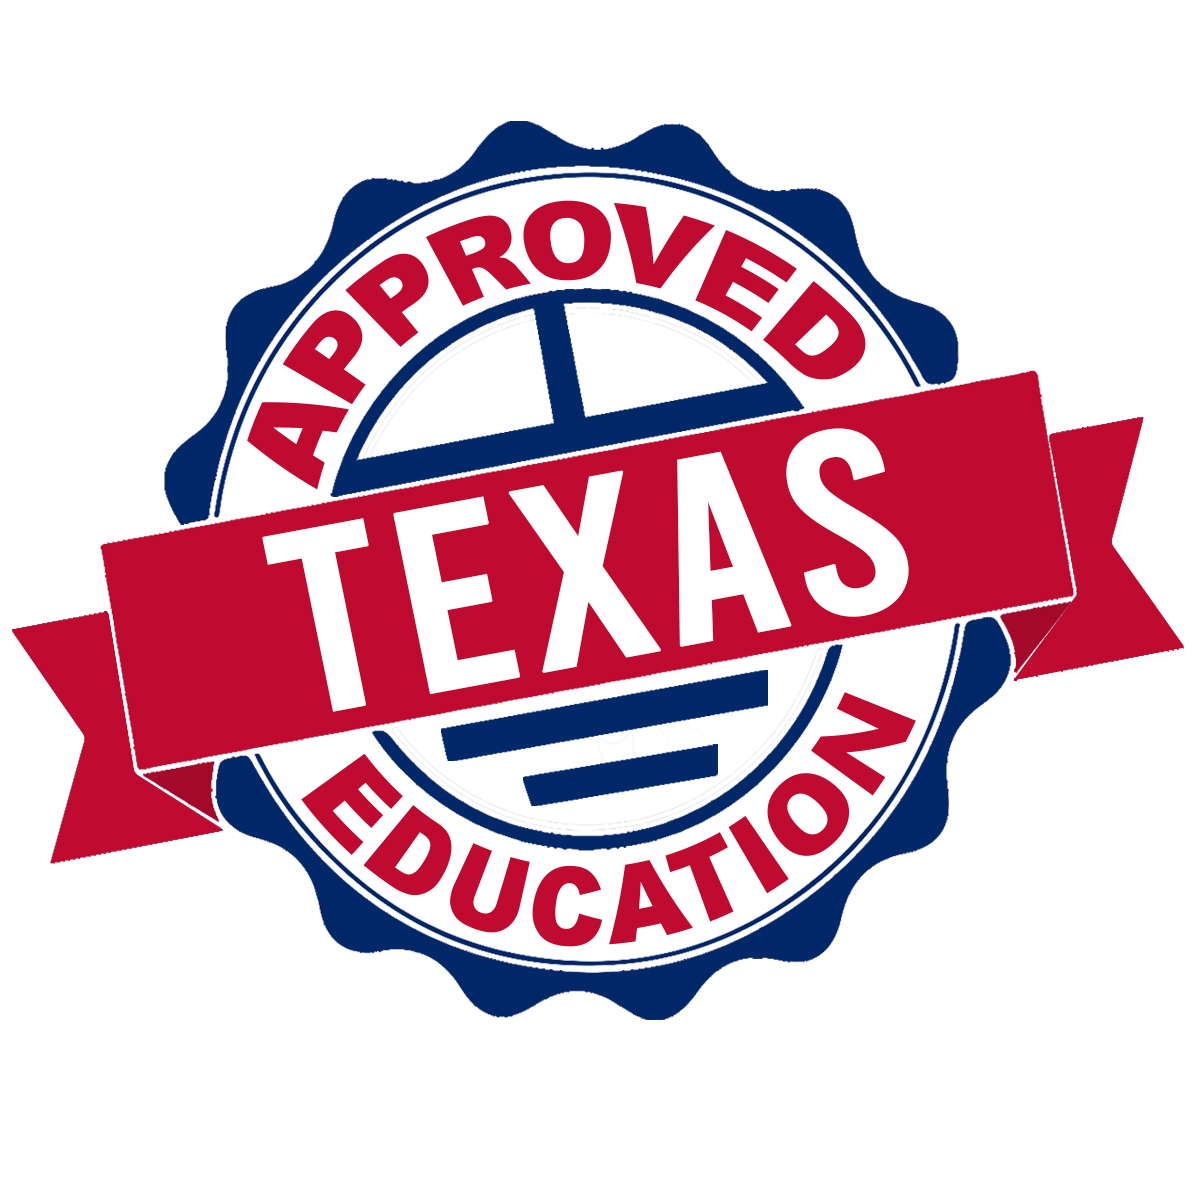 Approved Texas Electrical Continuing Education Badge